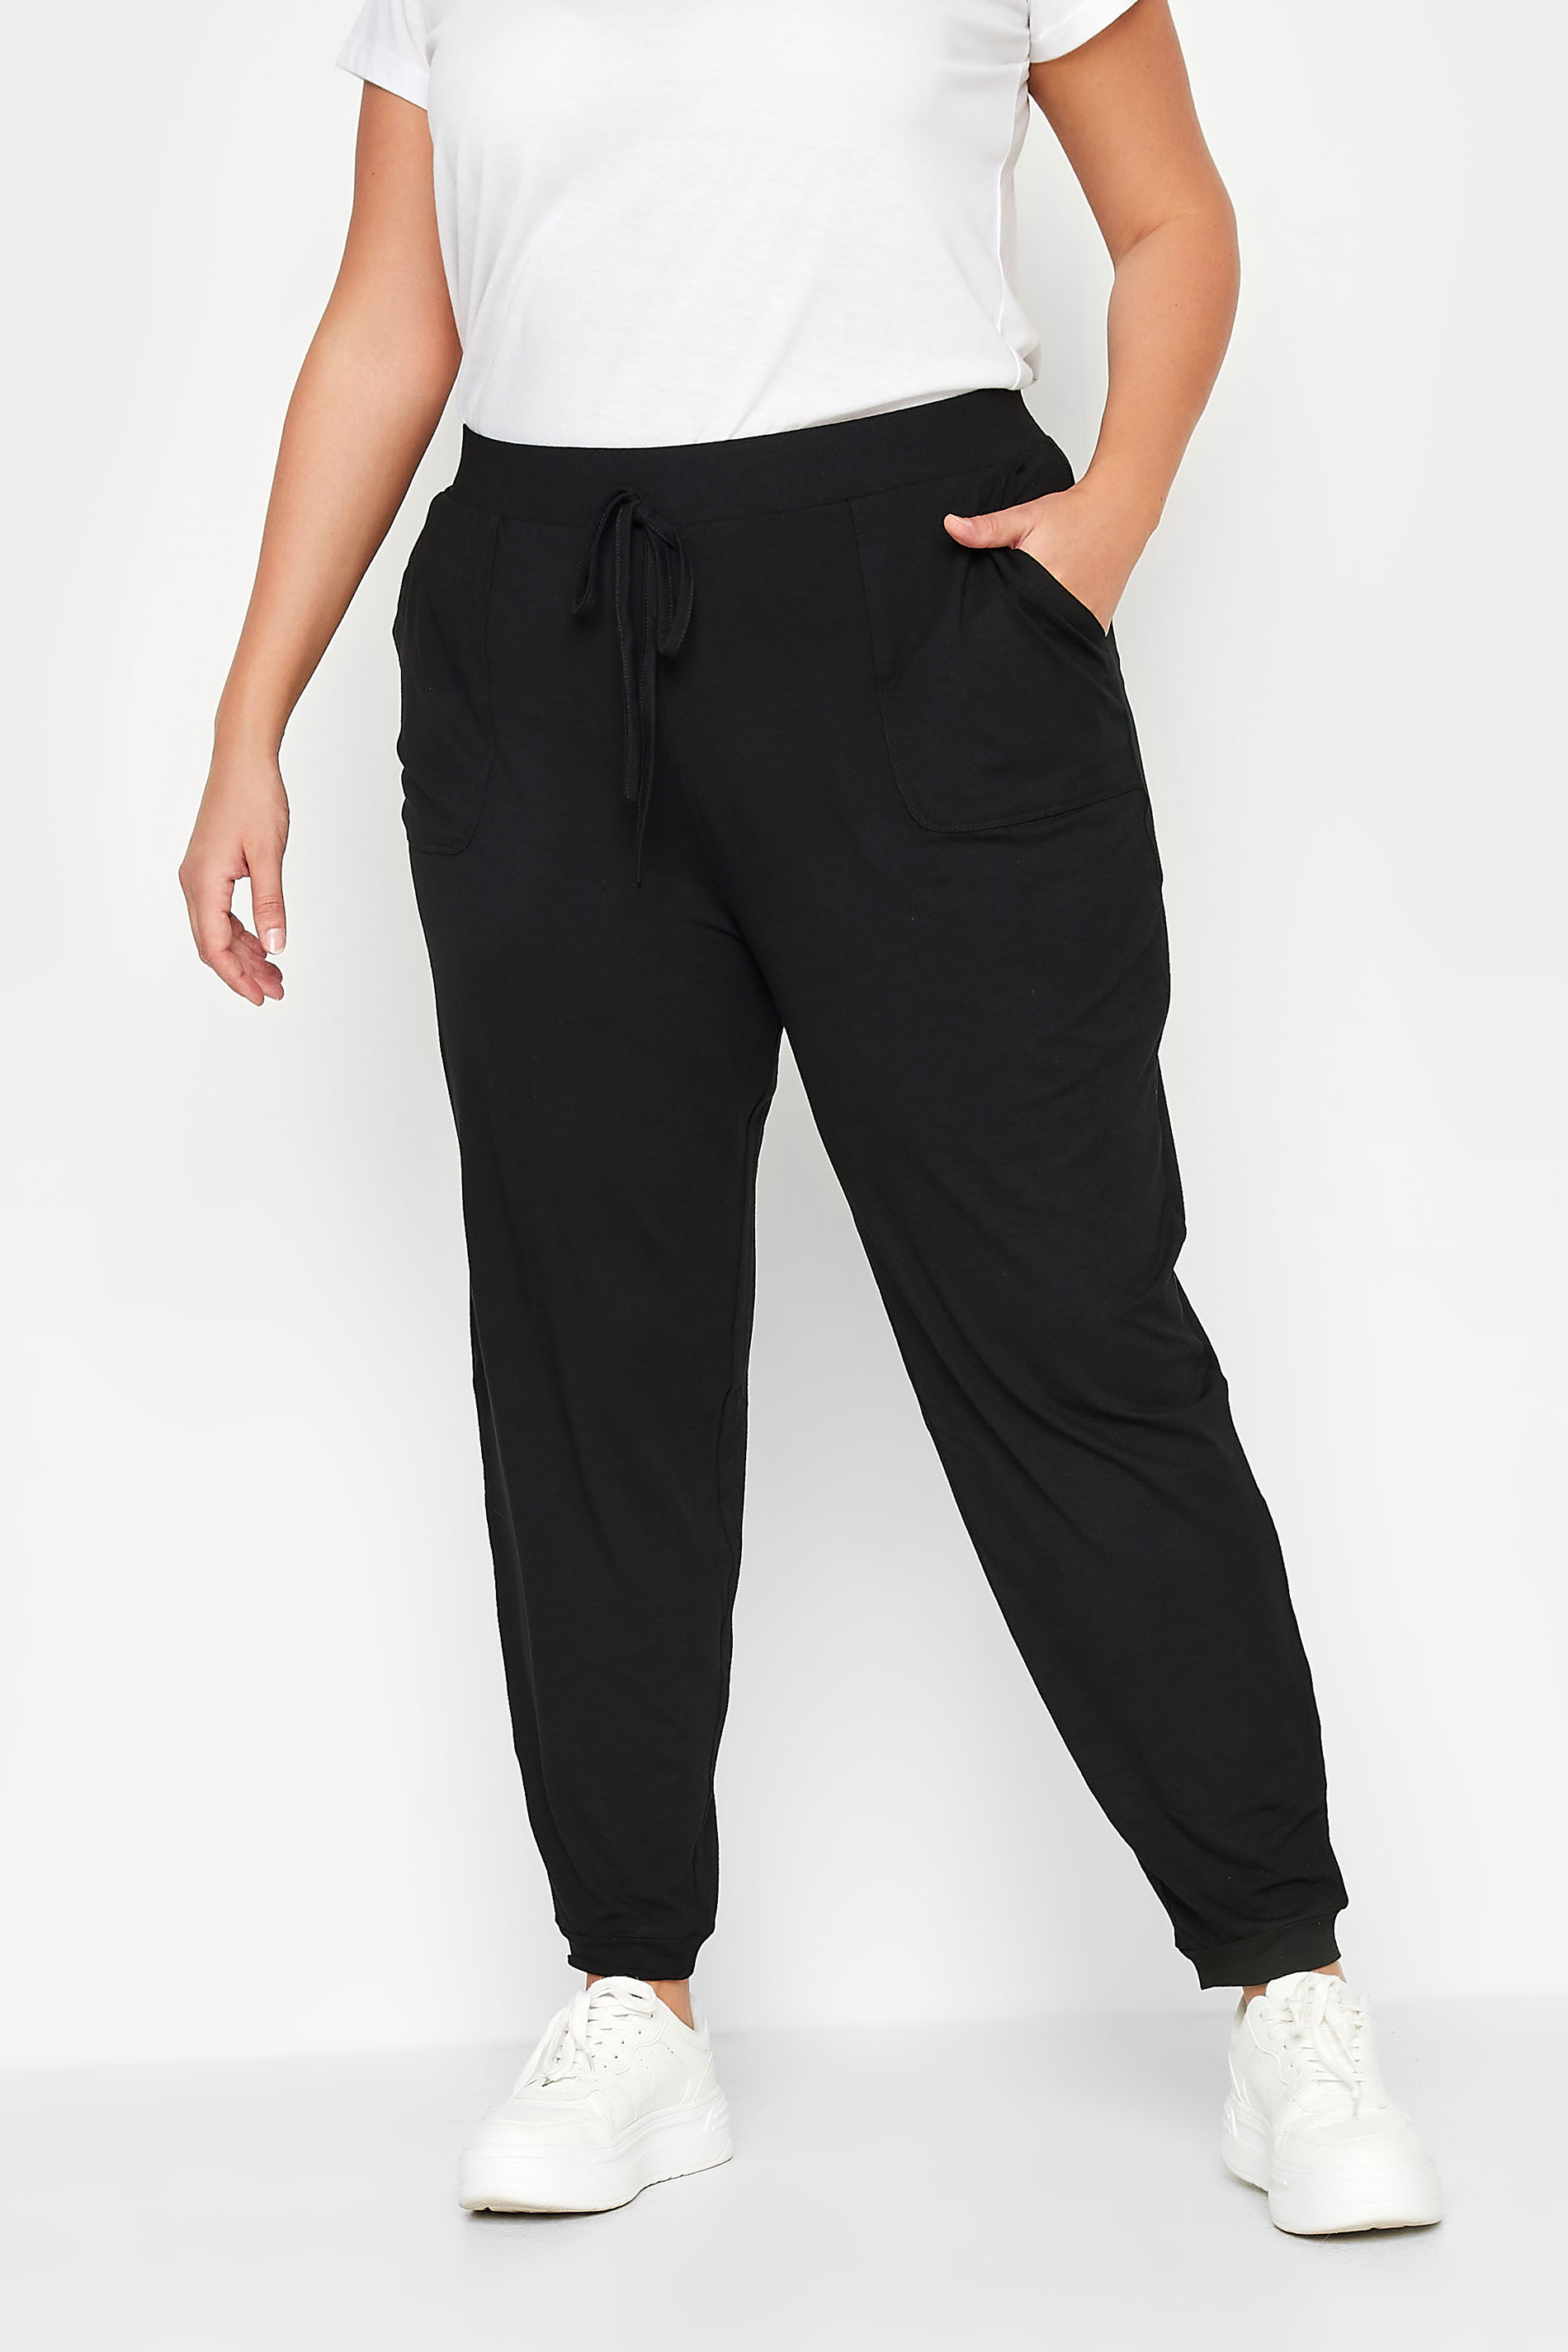 YOURS Plus Size Black Patch Pocket Joggers | Yours Clothing